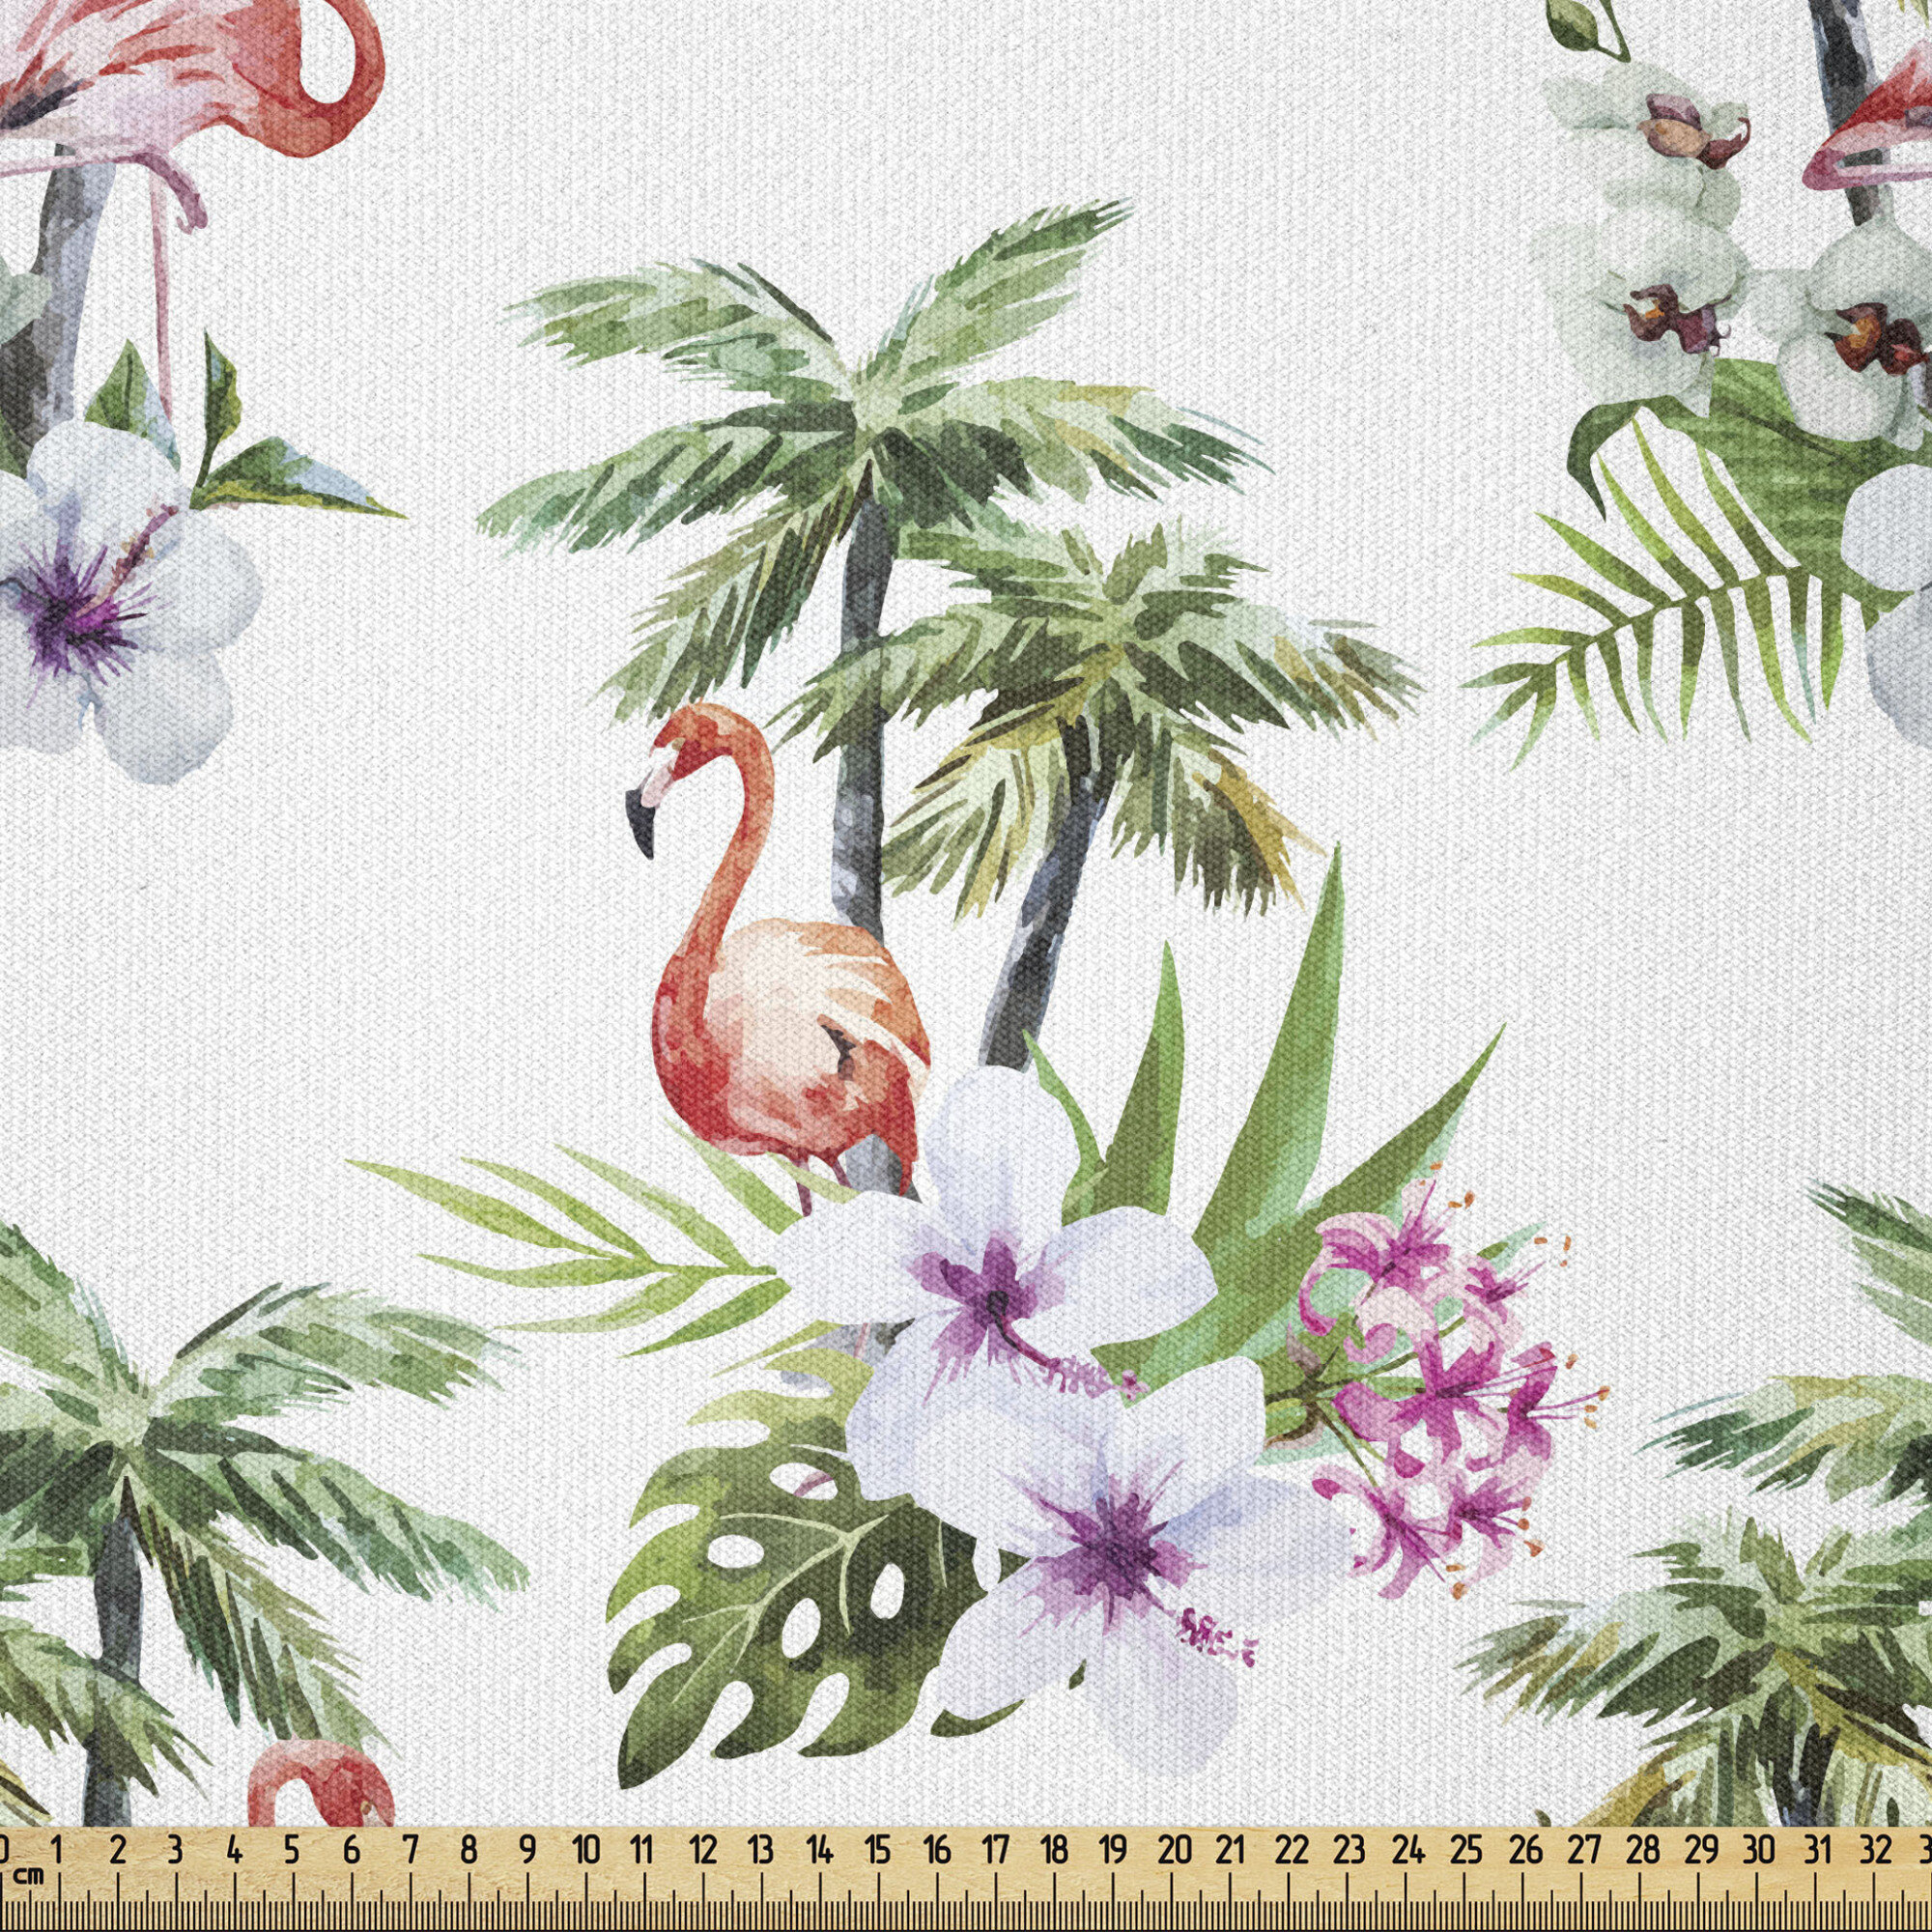 50 x 60 Ambesonne Palm Tree Soft Flannel Fleece Throw Blanket Multicolor Cozy Plush for Indoor and Outdoor Use Tropical Island Inspired Pattern with Flamingo Birds Hibiscus Flowers Watercolors